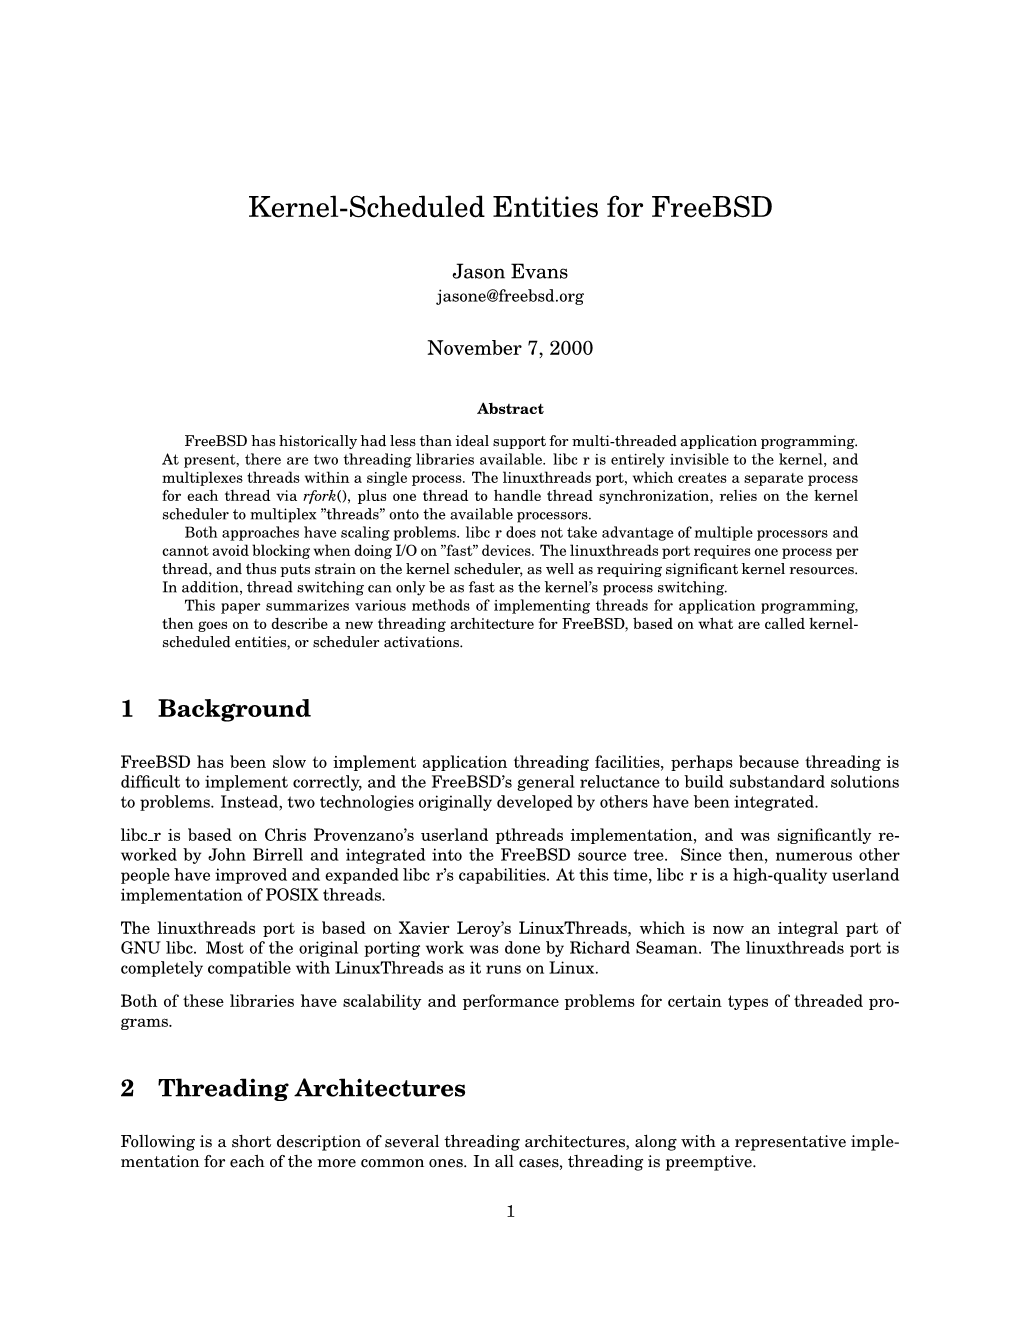 Kernel-Scheduled Entities for Freebsd